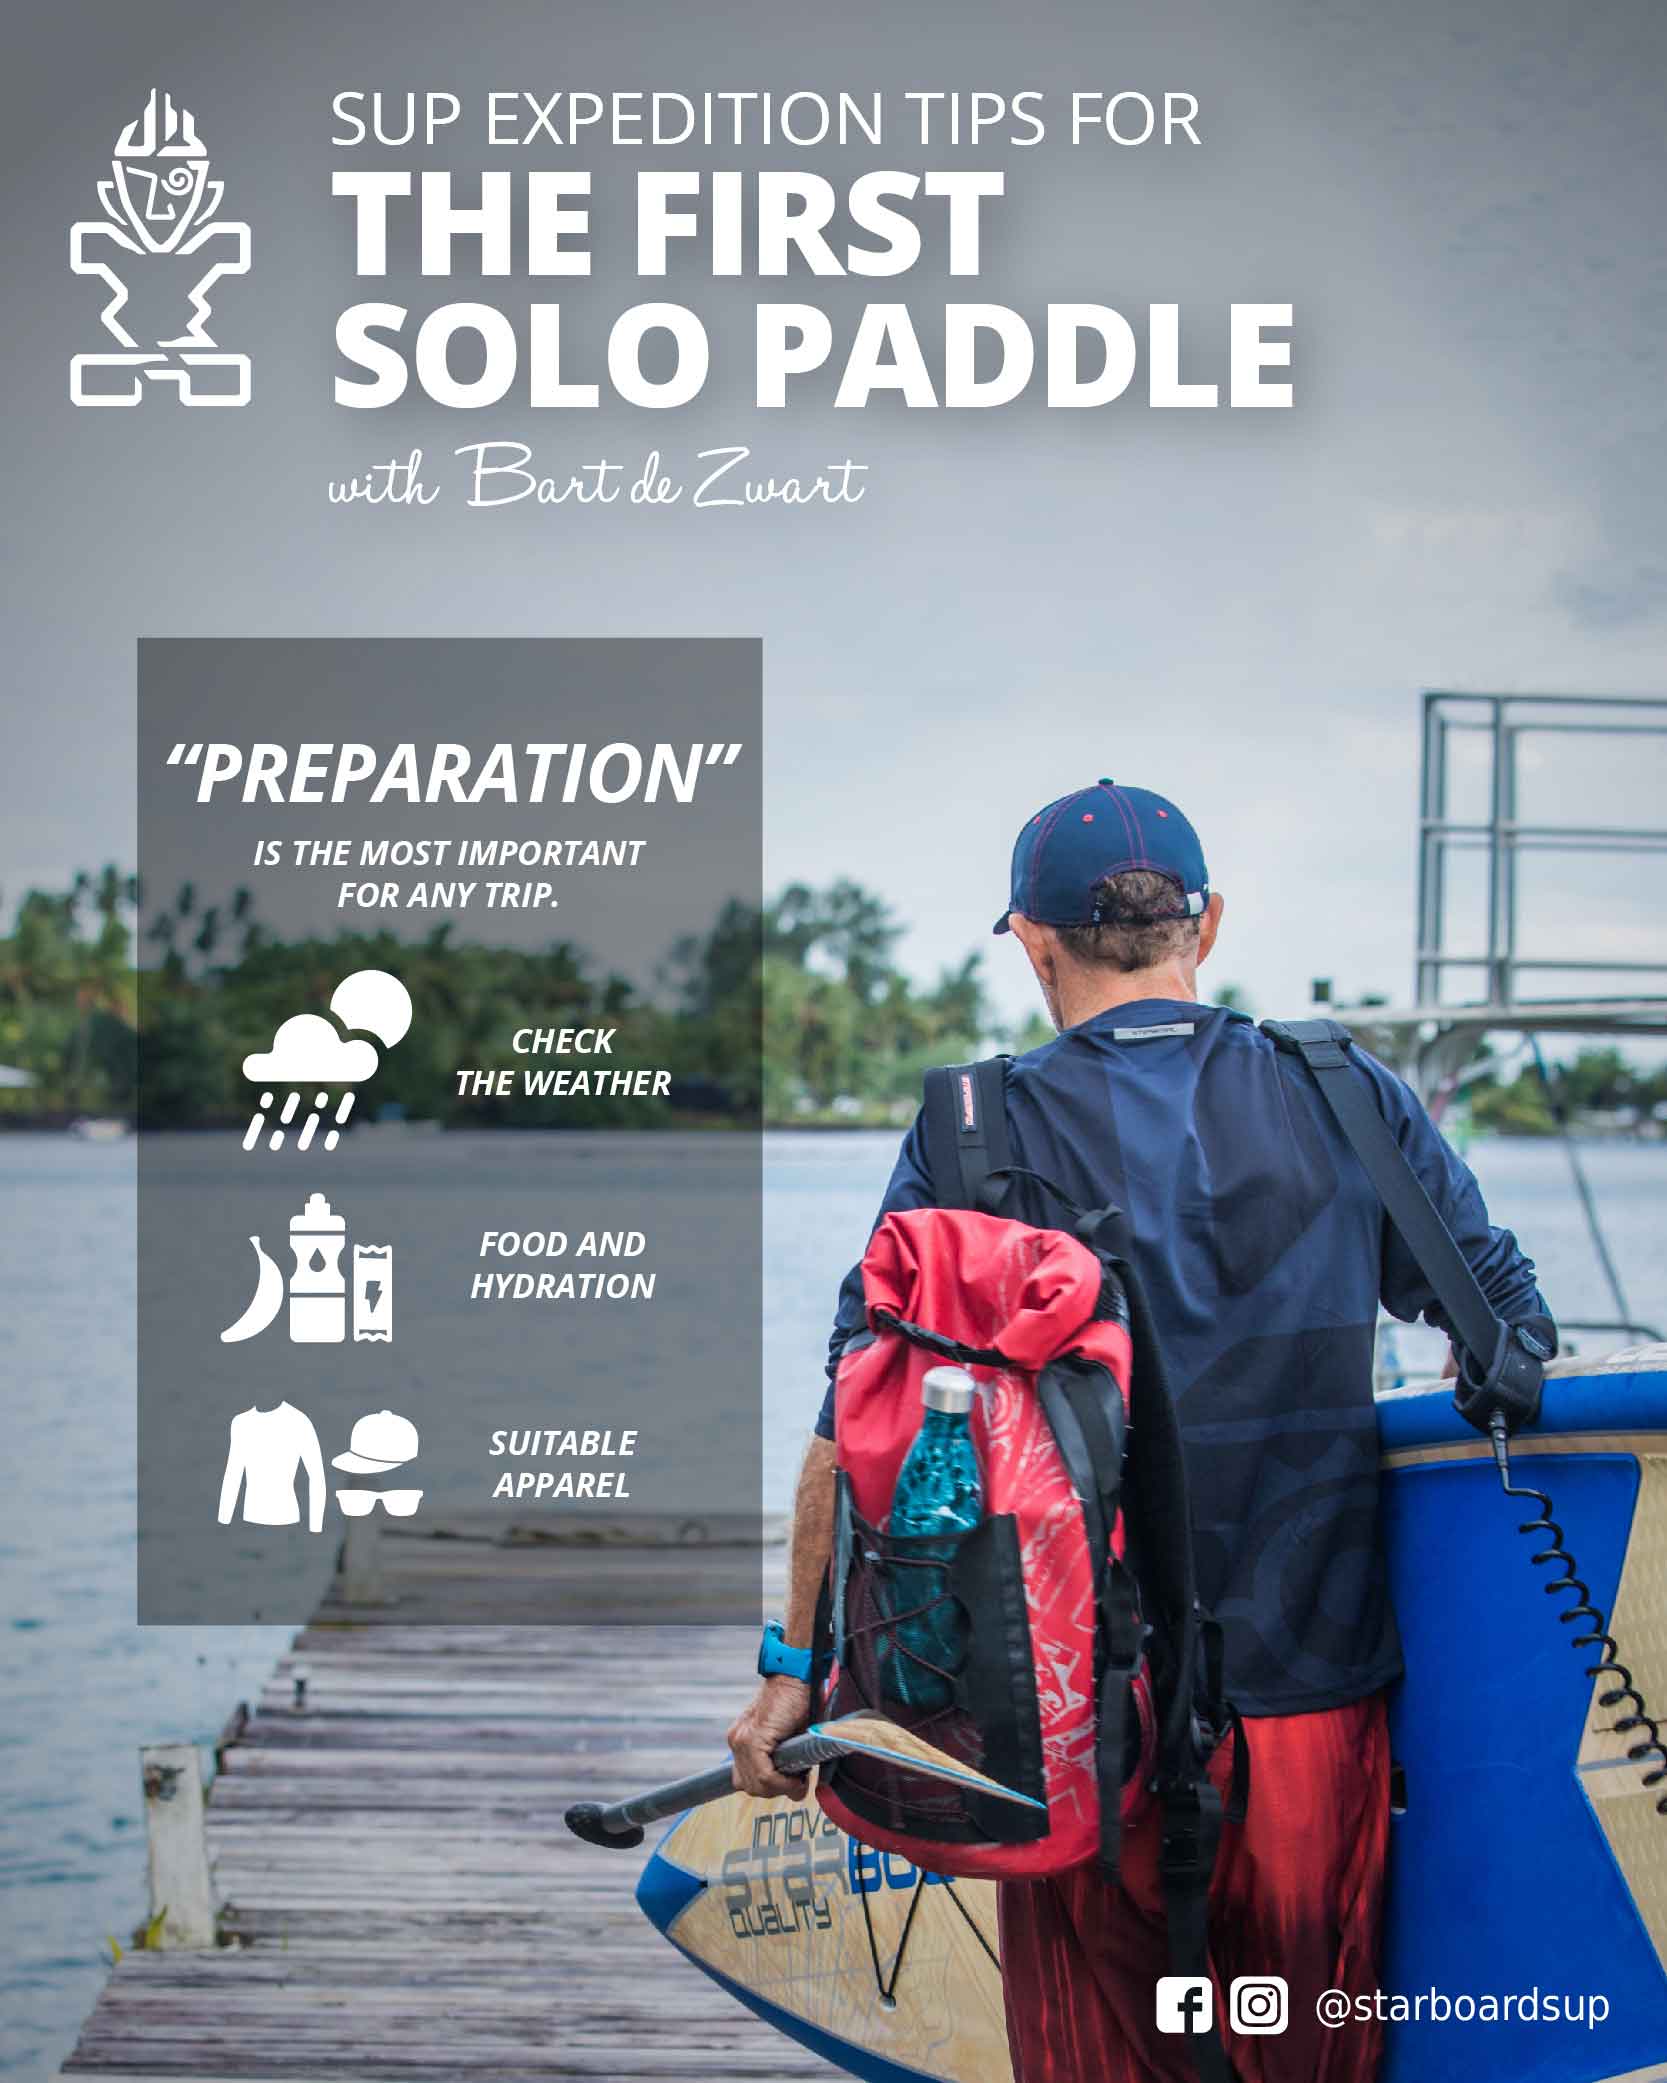 SUP Expedition Tips For The First Solo Paddle Prepartion Bart de Zwart Starboard SUP